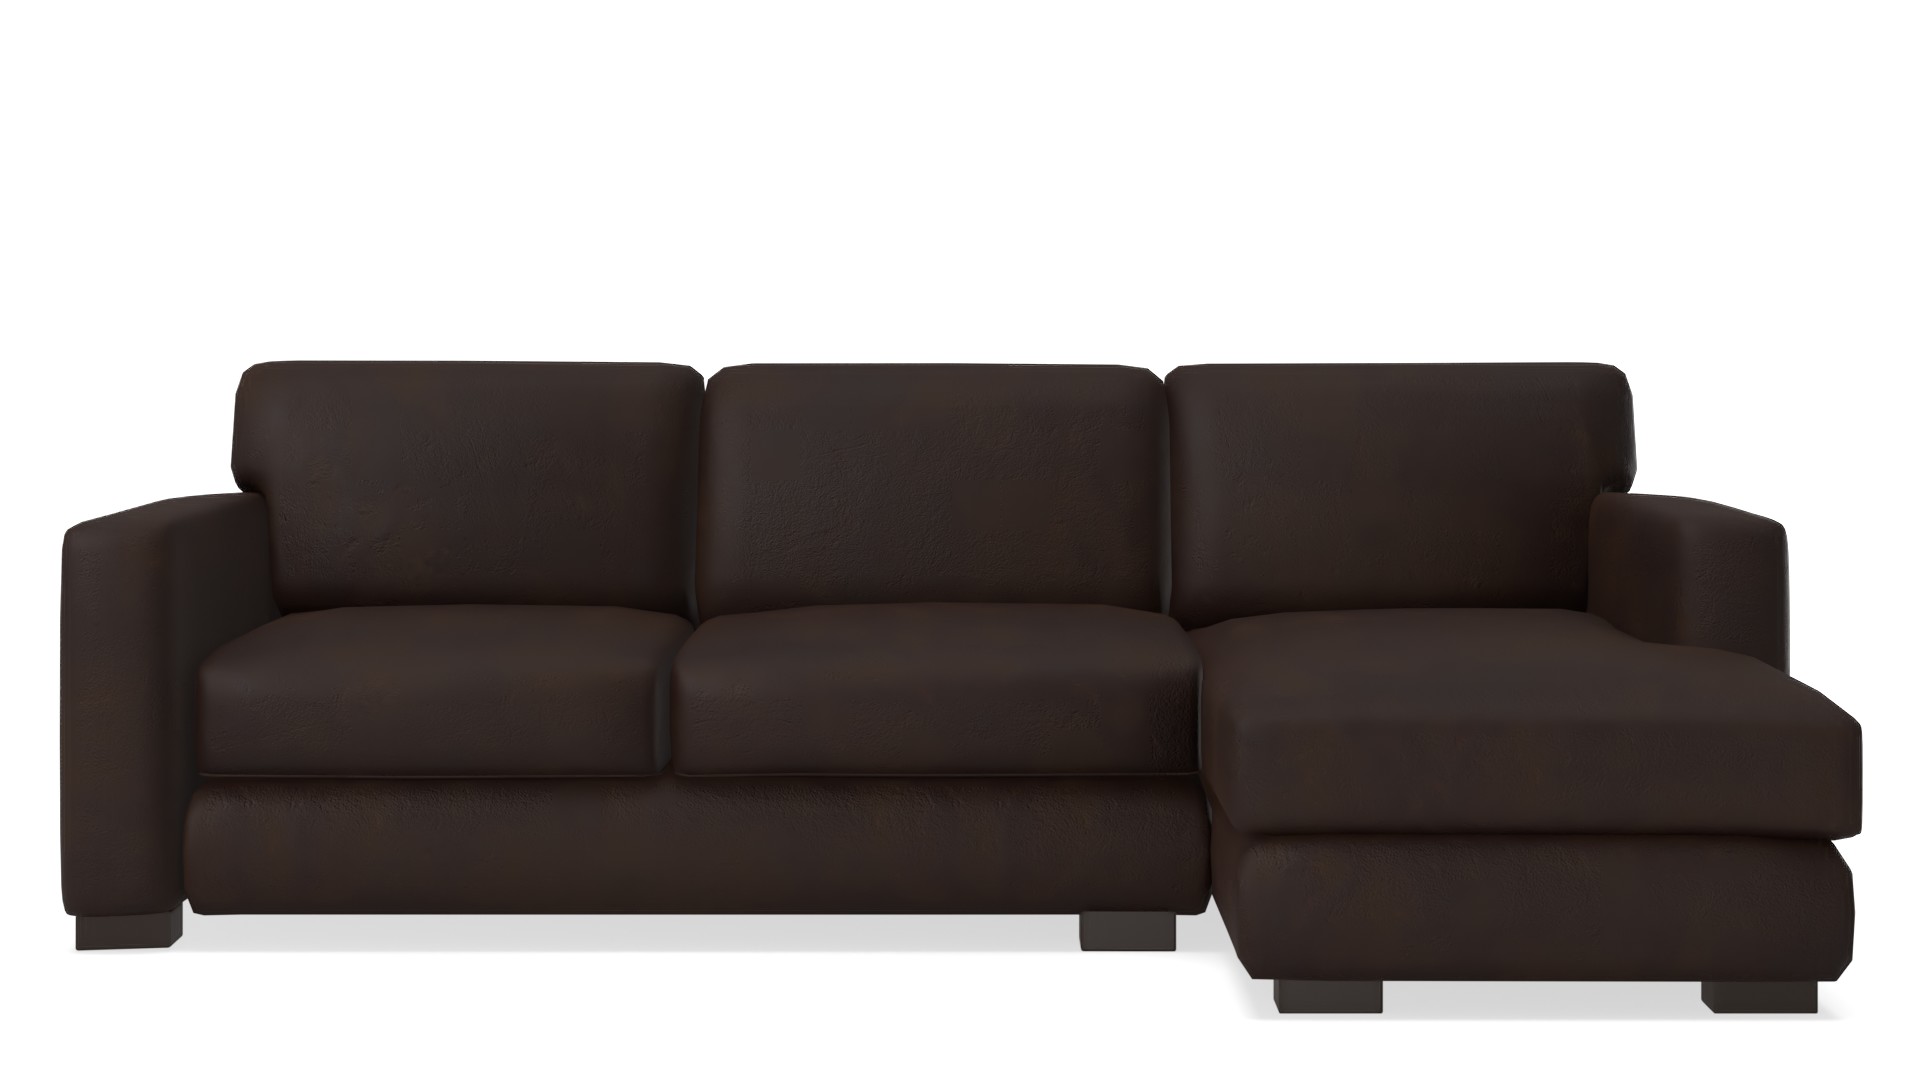 turner square arm leather sleeper sofa review